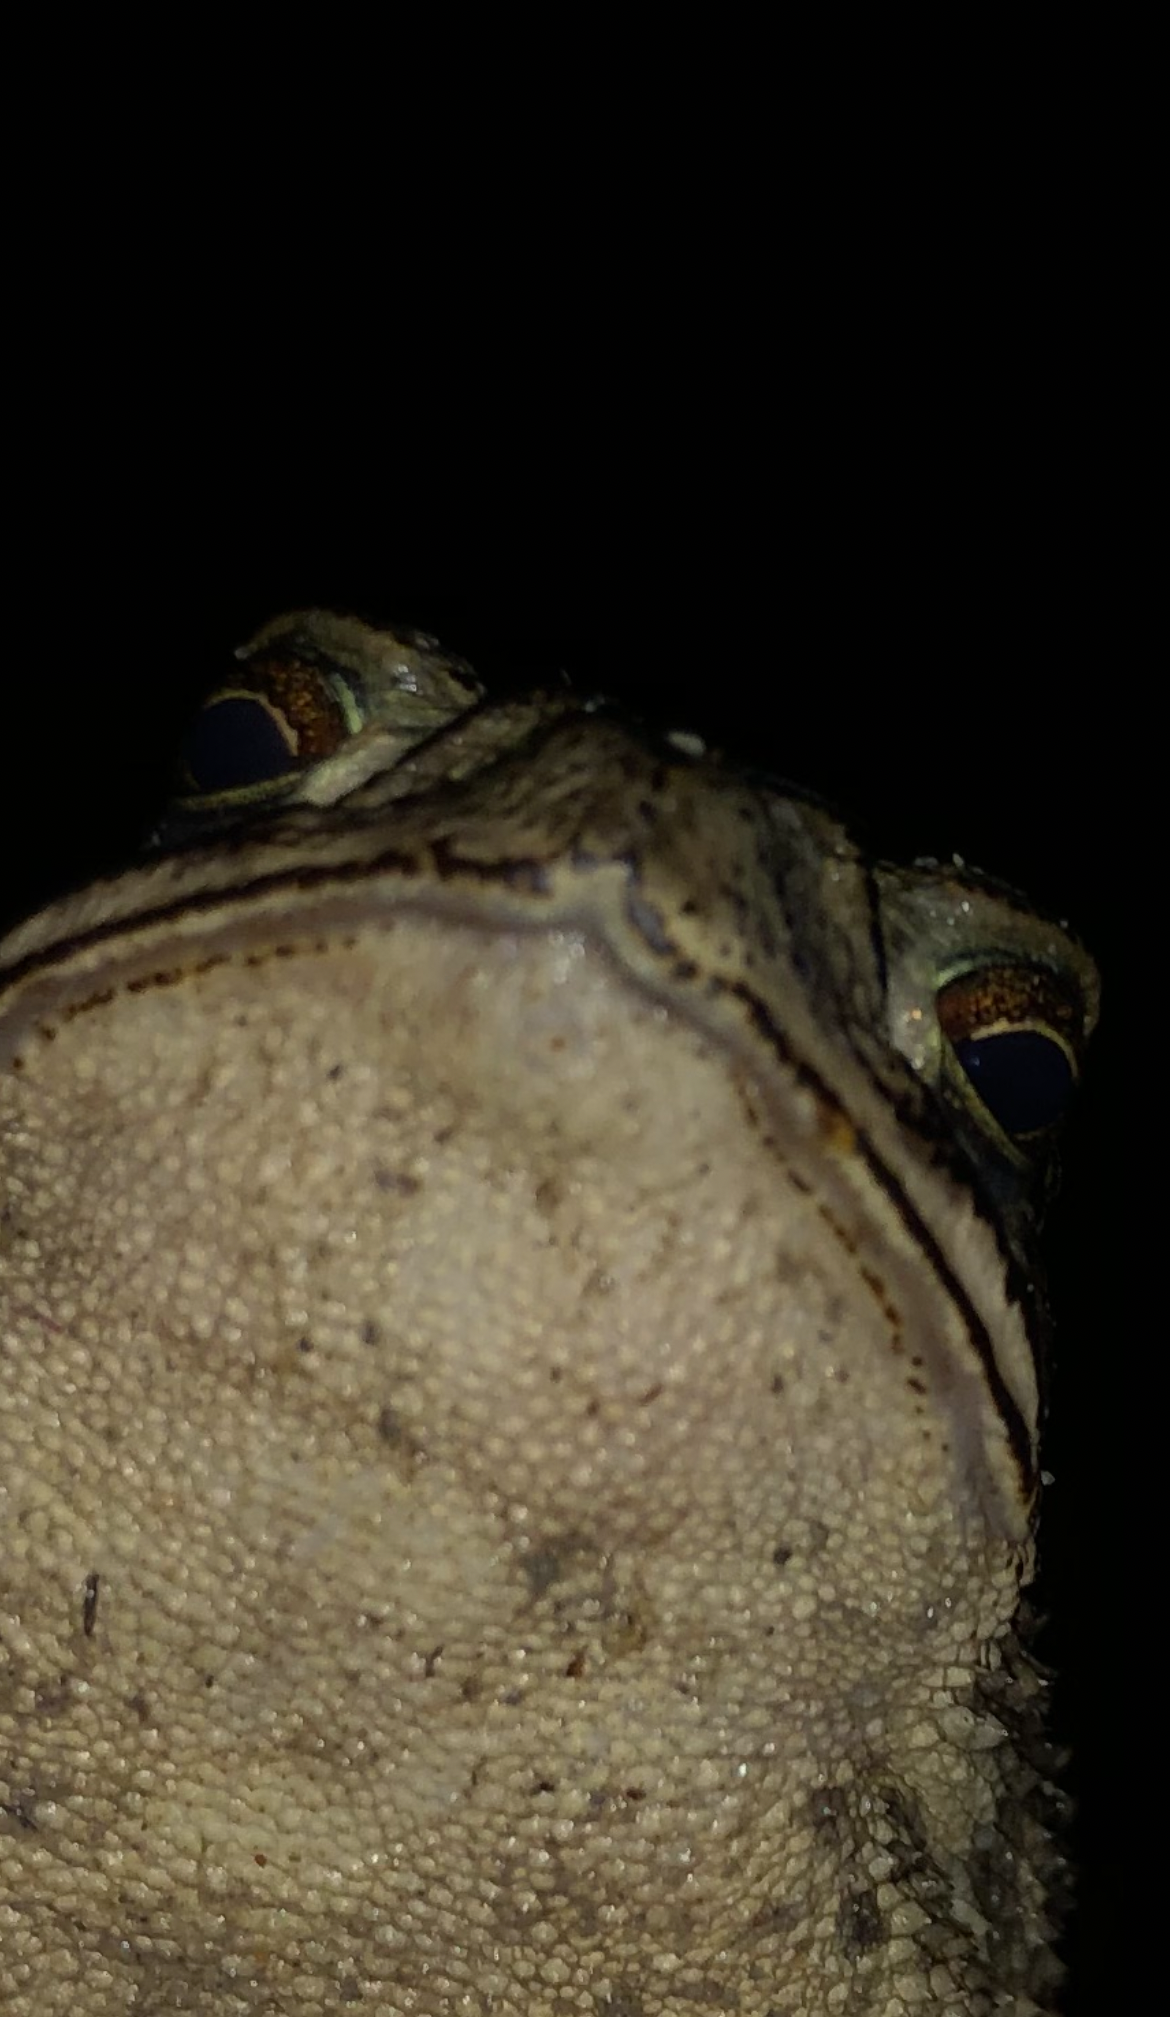 Judgy Toad Blank Meme Template